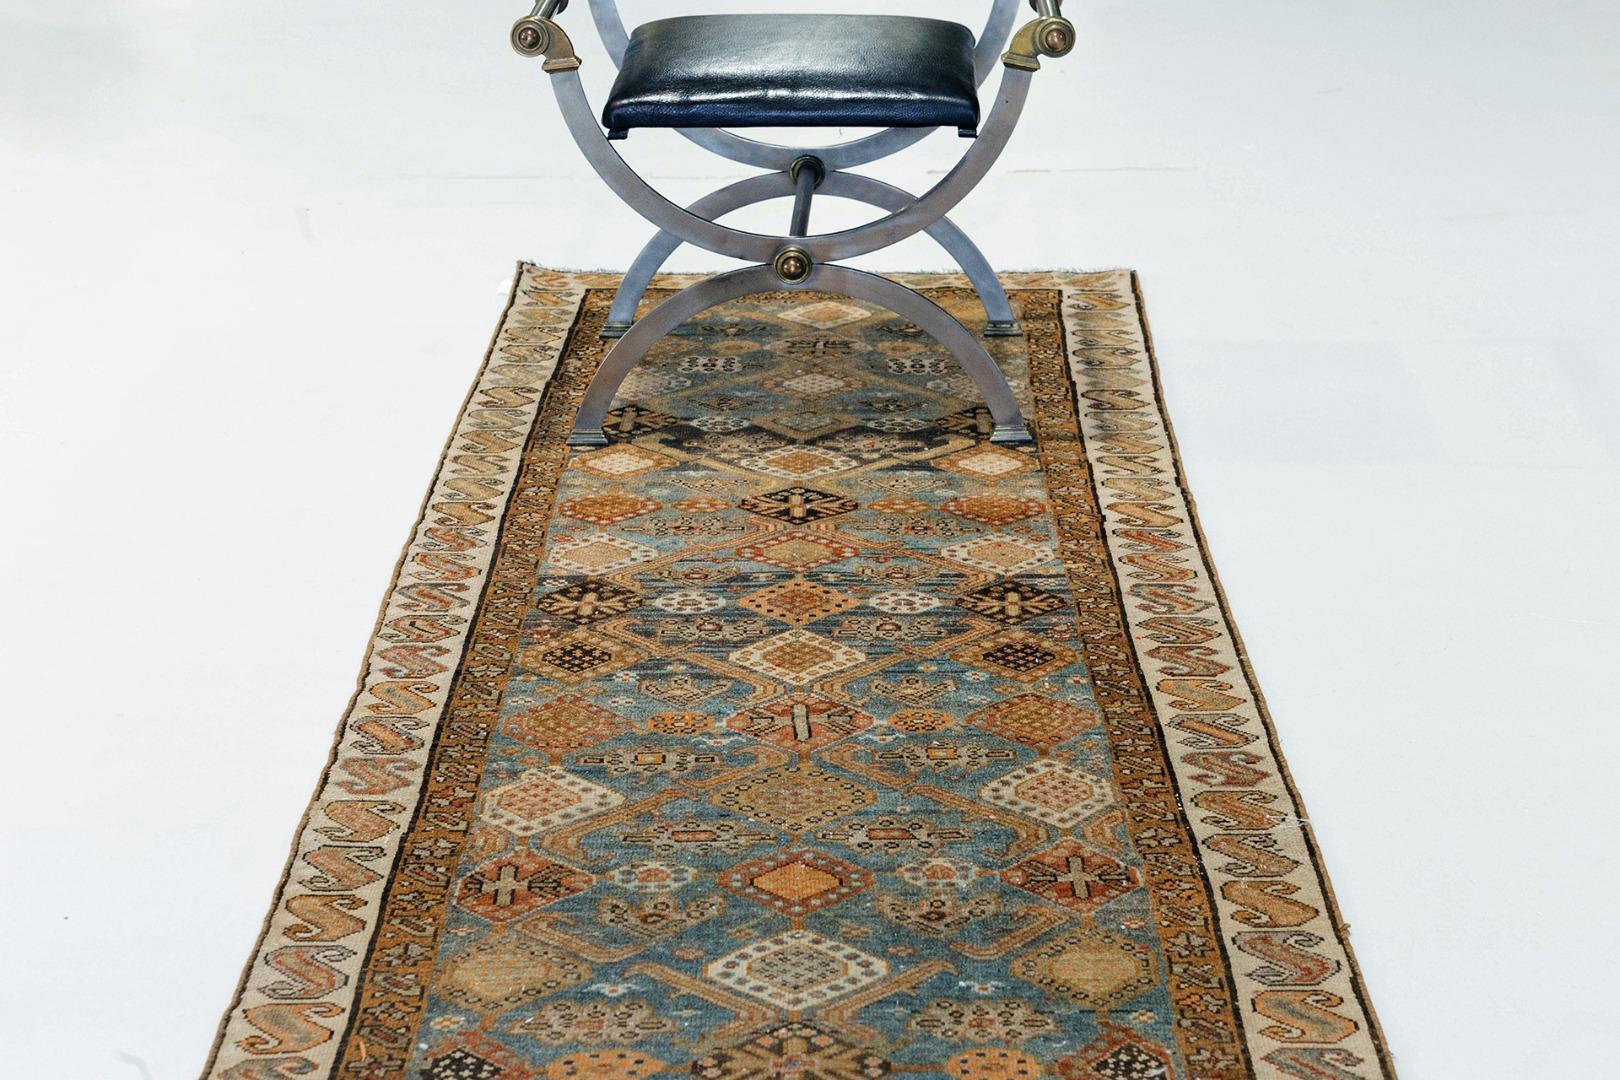 A antique Persian Mahal runner with beautiful diamond shapes composing most of its field. Classic motifs in its surrounding borders add an elegant touch. This rugs ornate patterns and vibrant colors work together to bring a strong aesthetic appeal